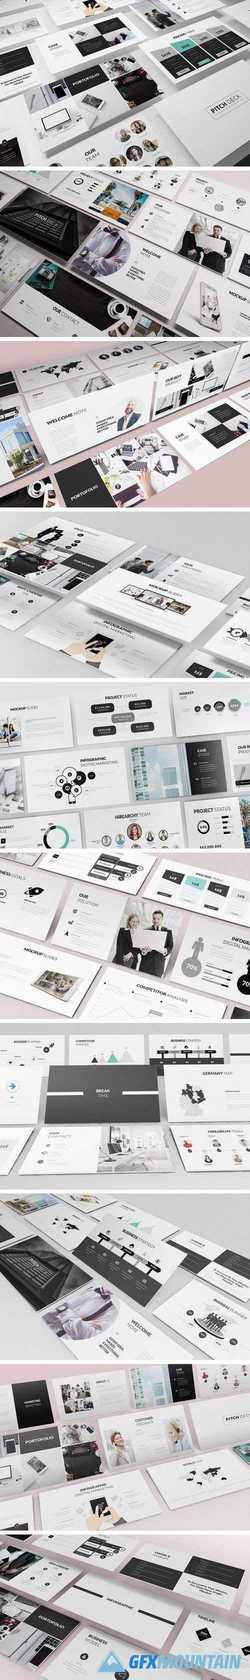 Pitch Deck Powerpoint Template 2299174